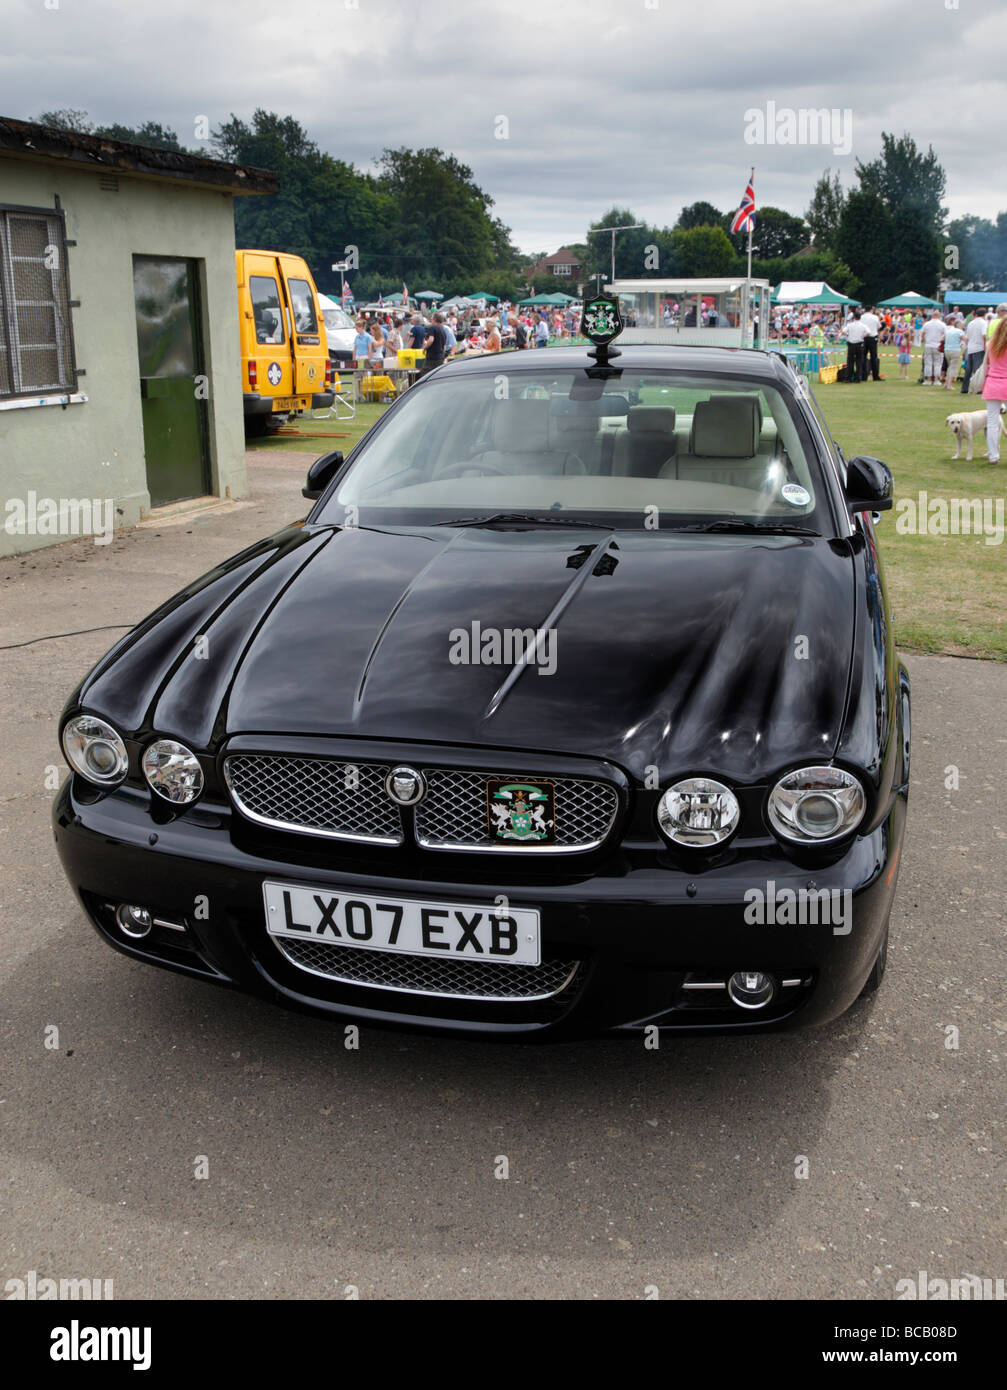 The London Borough of Bromley official Mayors Jaguar. Stock Photo